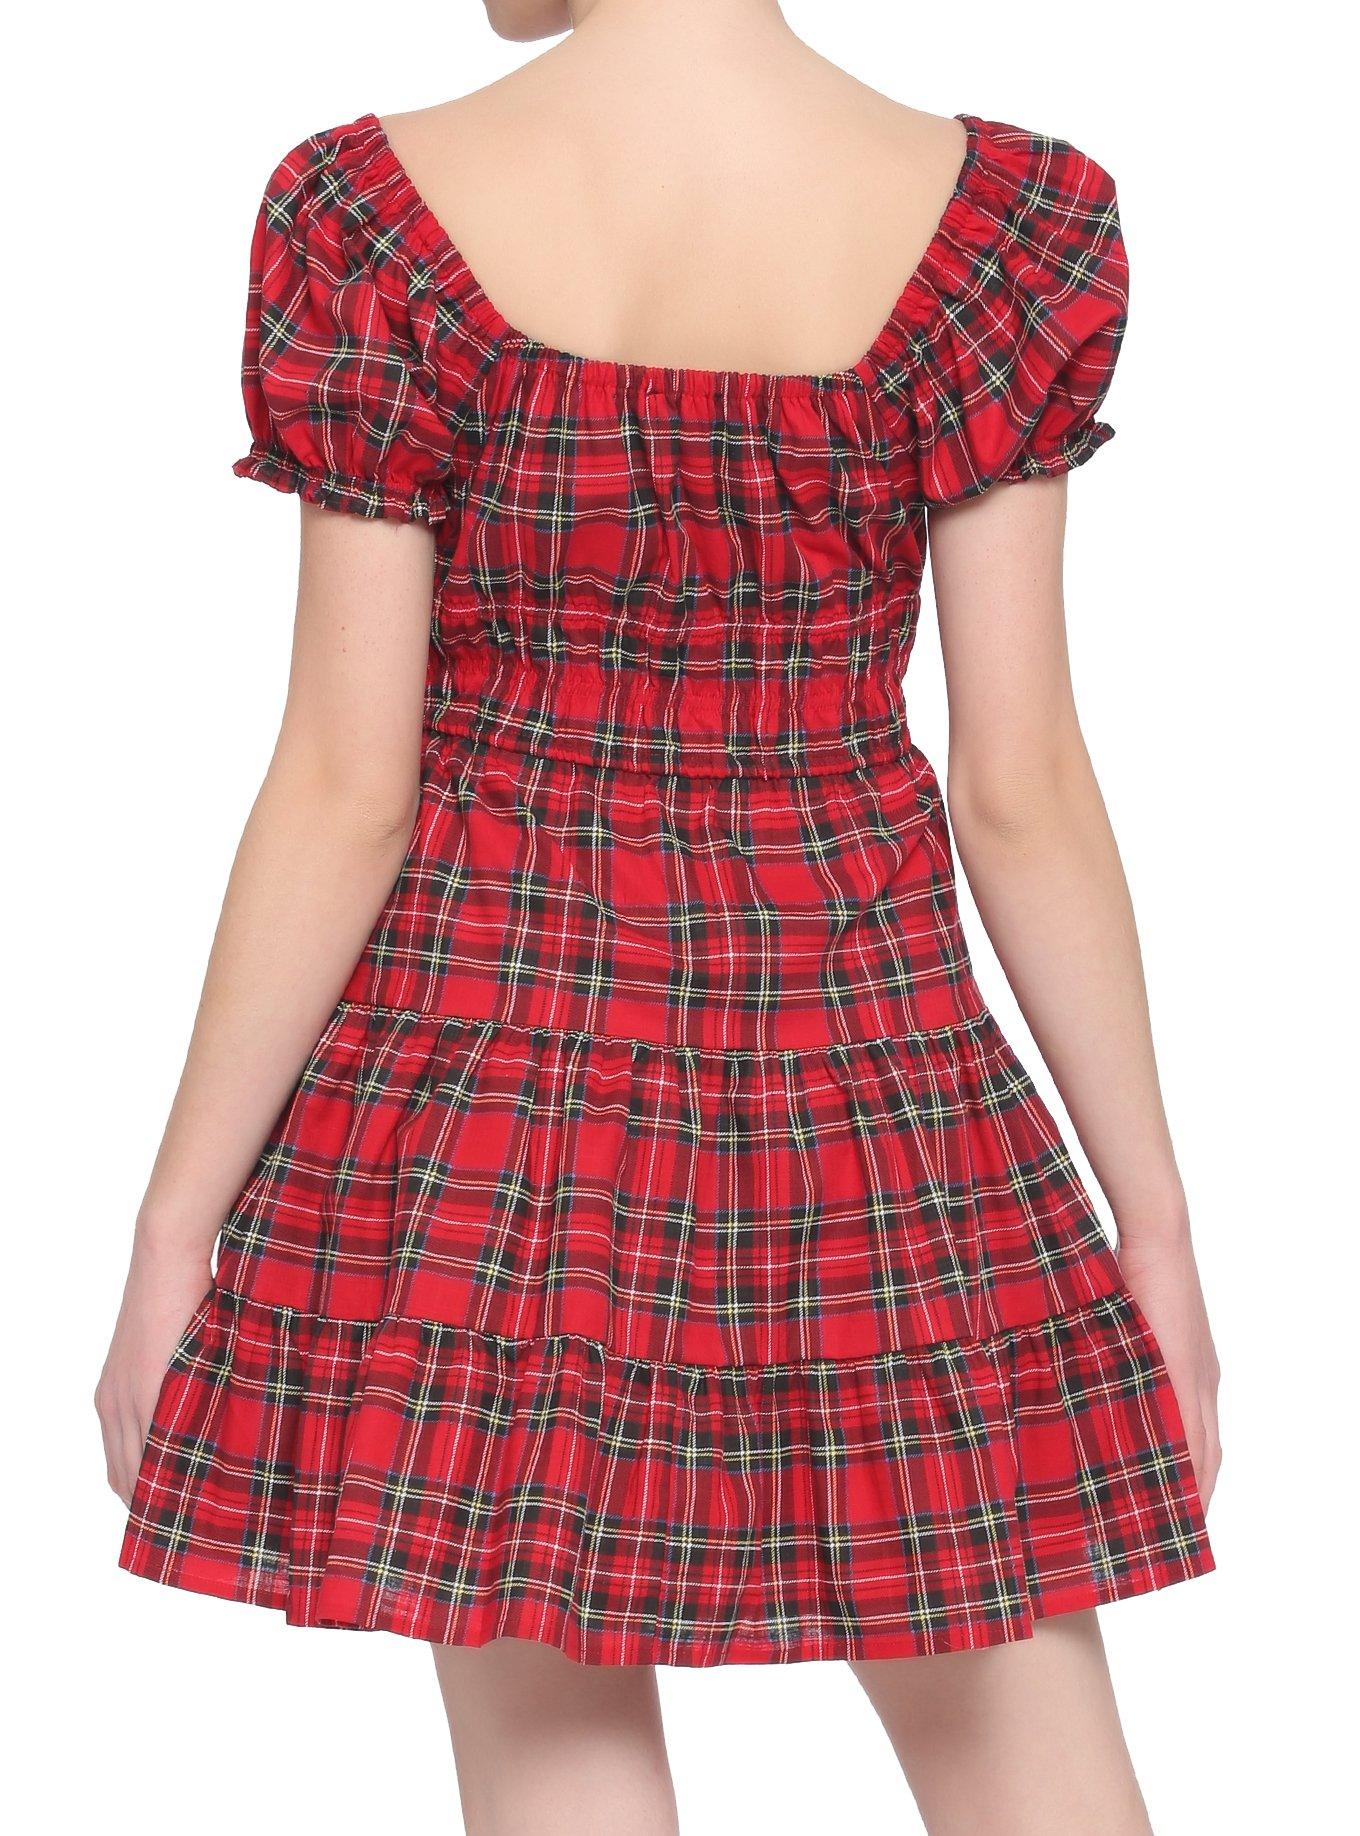 Red Plaid Tie-Front Babydoll Dress, PLAID - RED, alternate